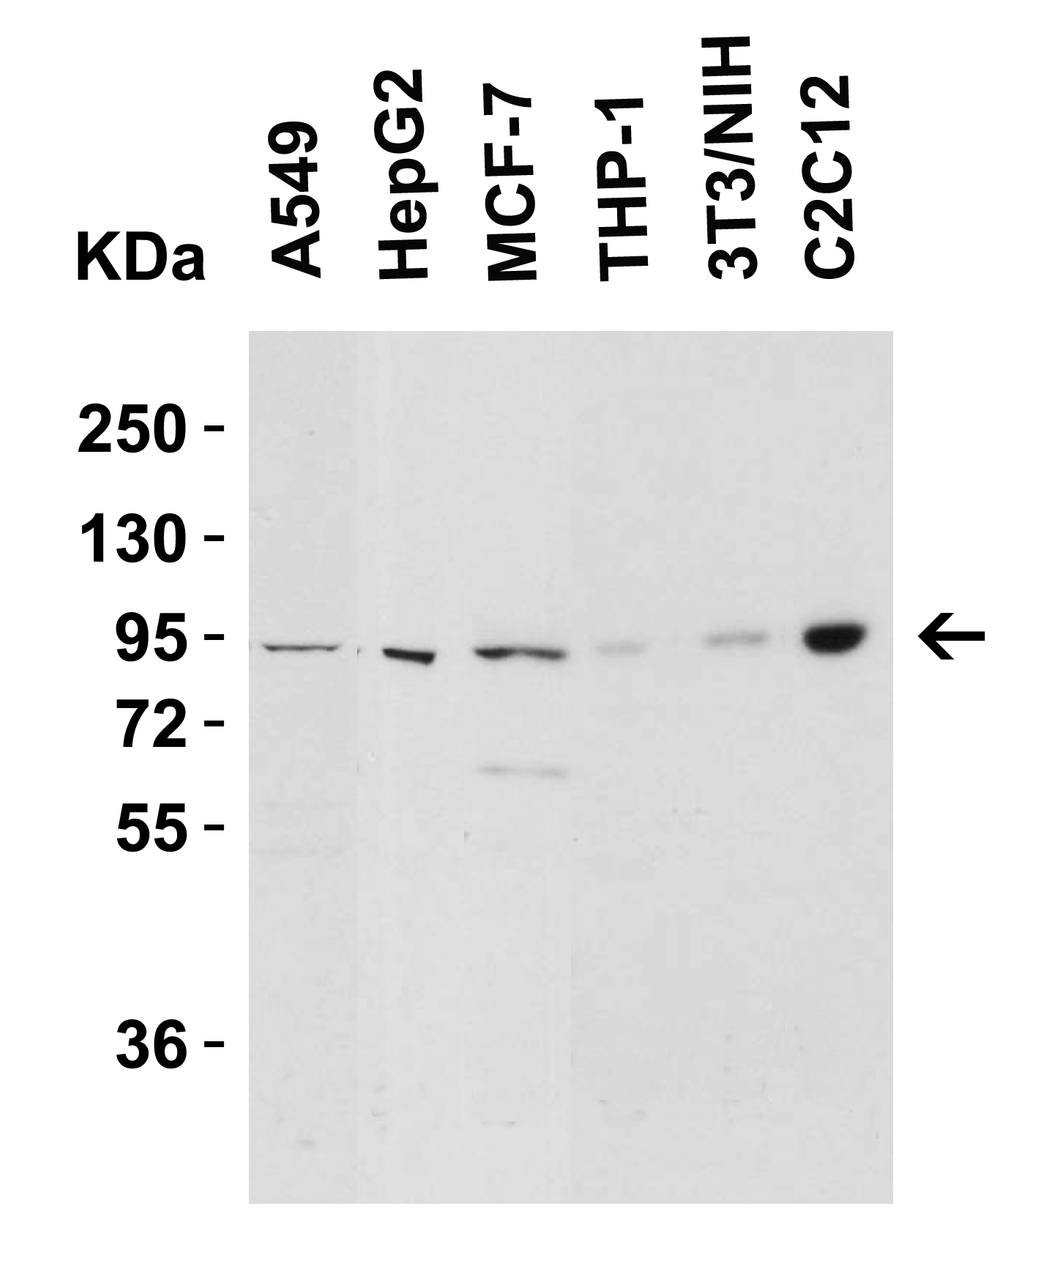 Figure 2 Western Blot Validation in Human and Mouse Cell Lines
Loading: 15 ug of lysates per lane.
Antibodies: Nephrin 2265 (2 ug/mL) , 1h incubation at RT in 5% NFDM/TBST.
Secondary: Goat anti-rabbit IgG HRP conjugate at 1:10000 dilution.